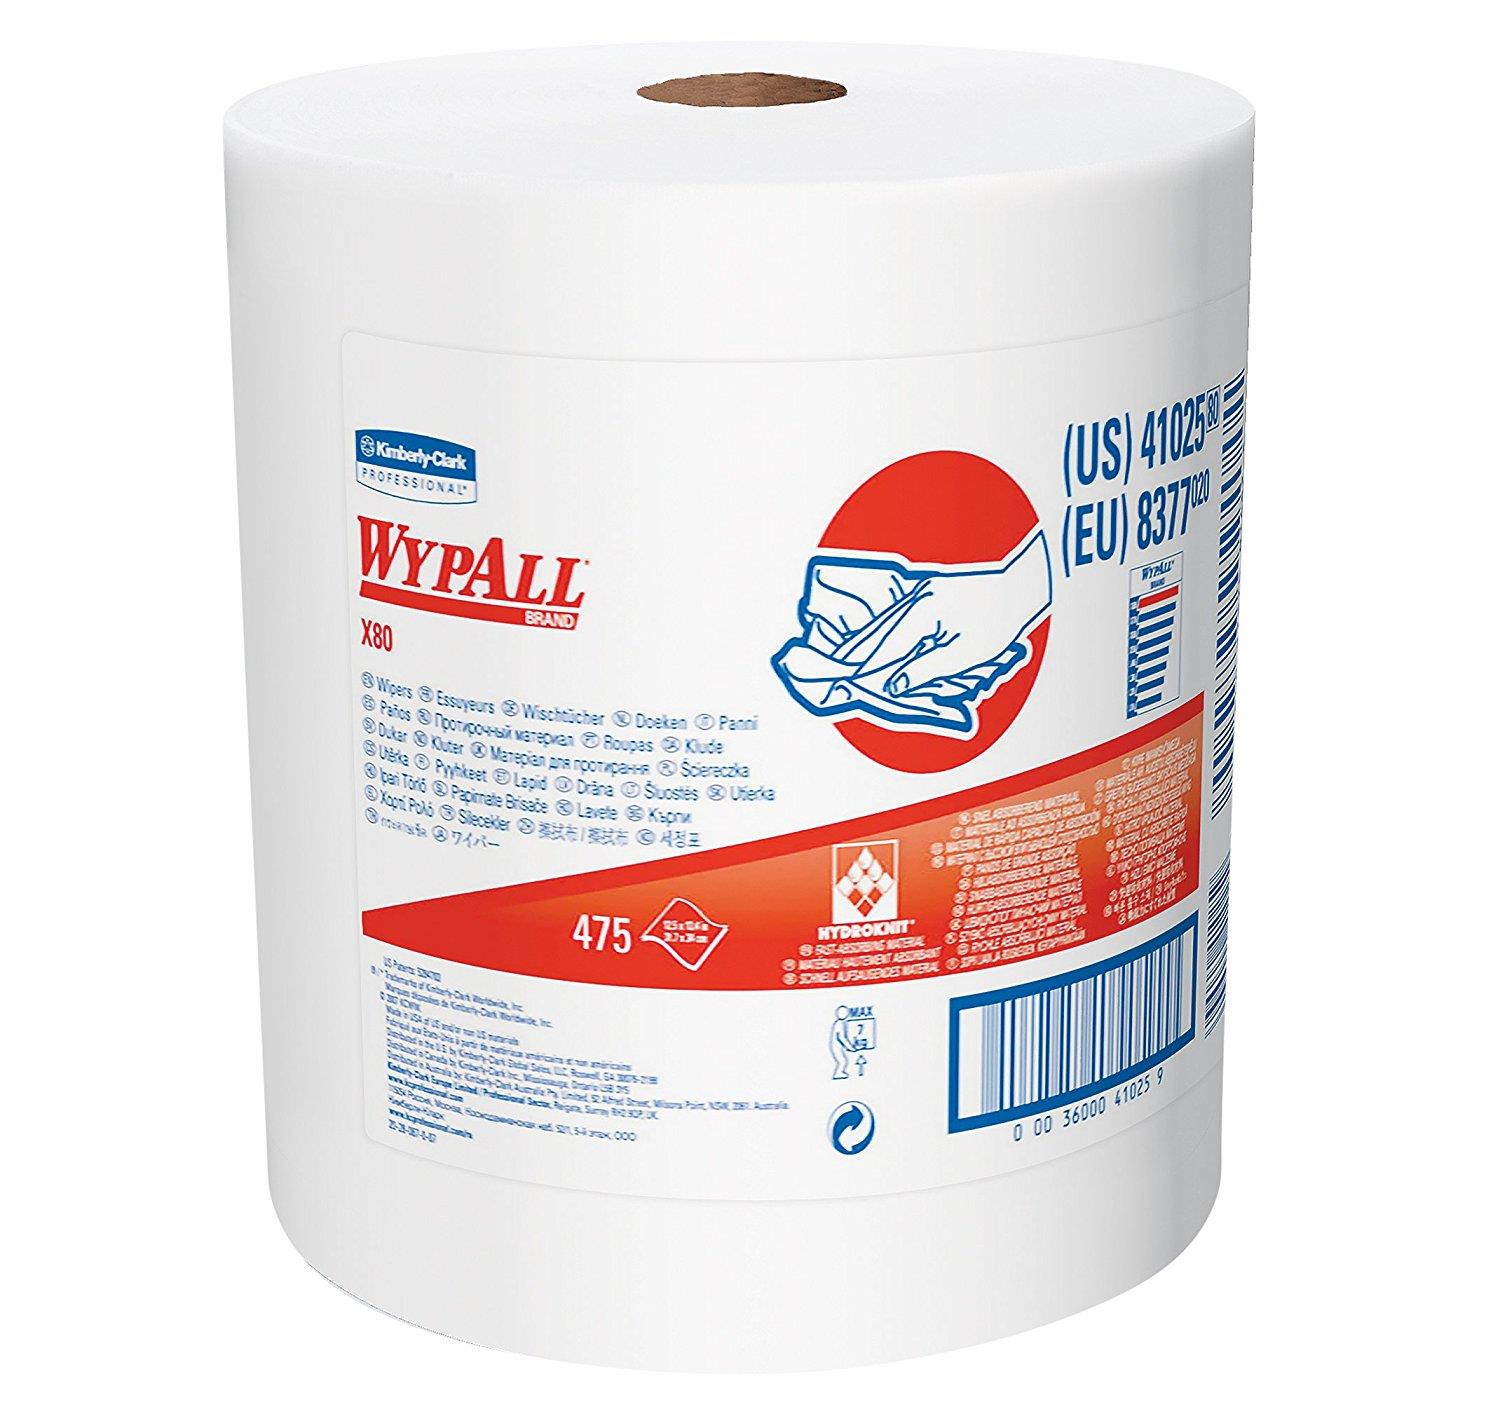 WYPALL X80 JUMBO ROLL WHITE 475 WIPERS - Cleaning & Janitorial